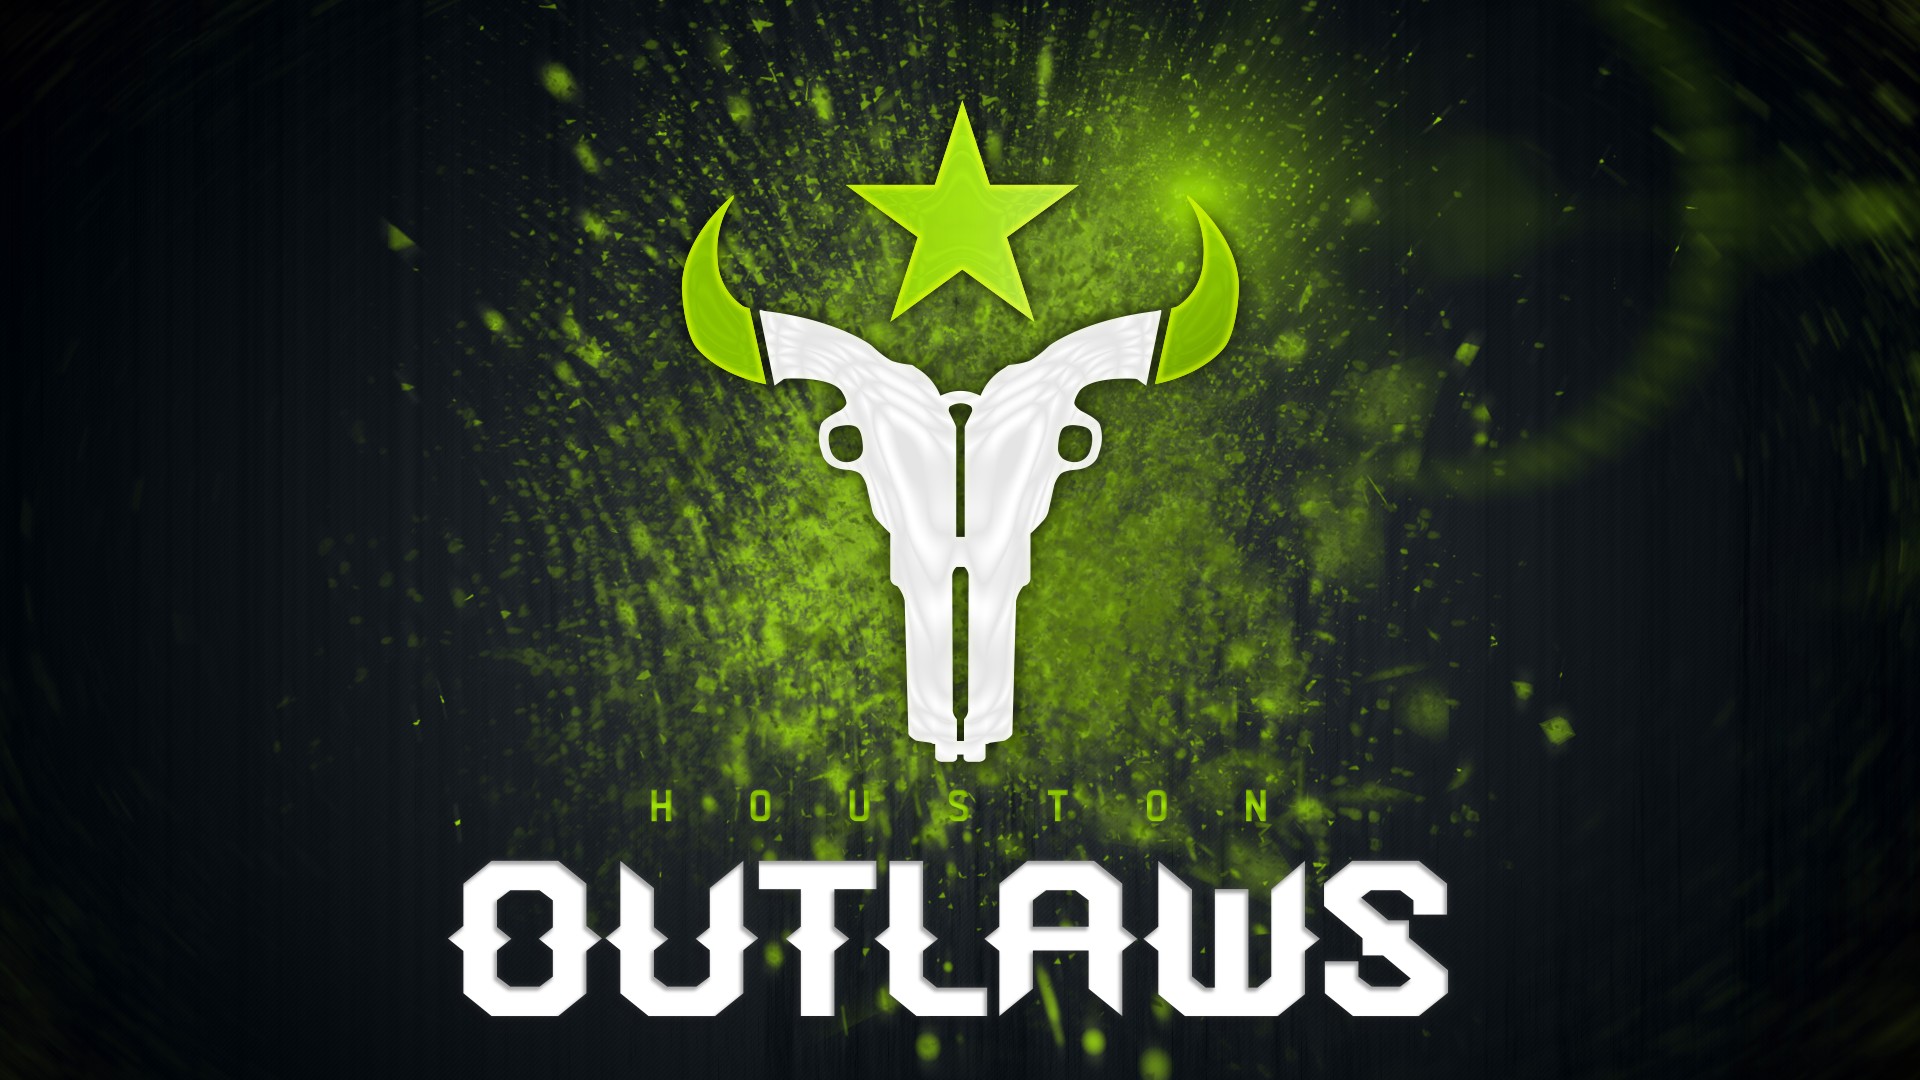 Overwatch, Overwatch League, Houston Outlaws, E sports Wallpaper